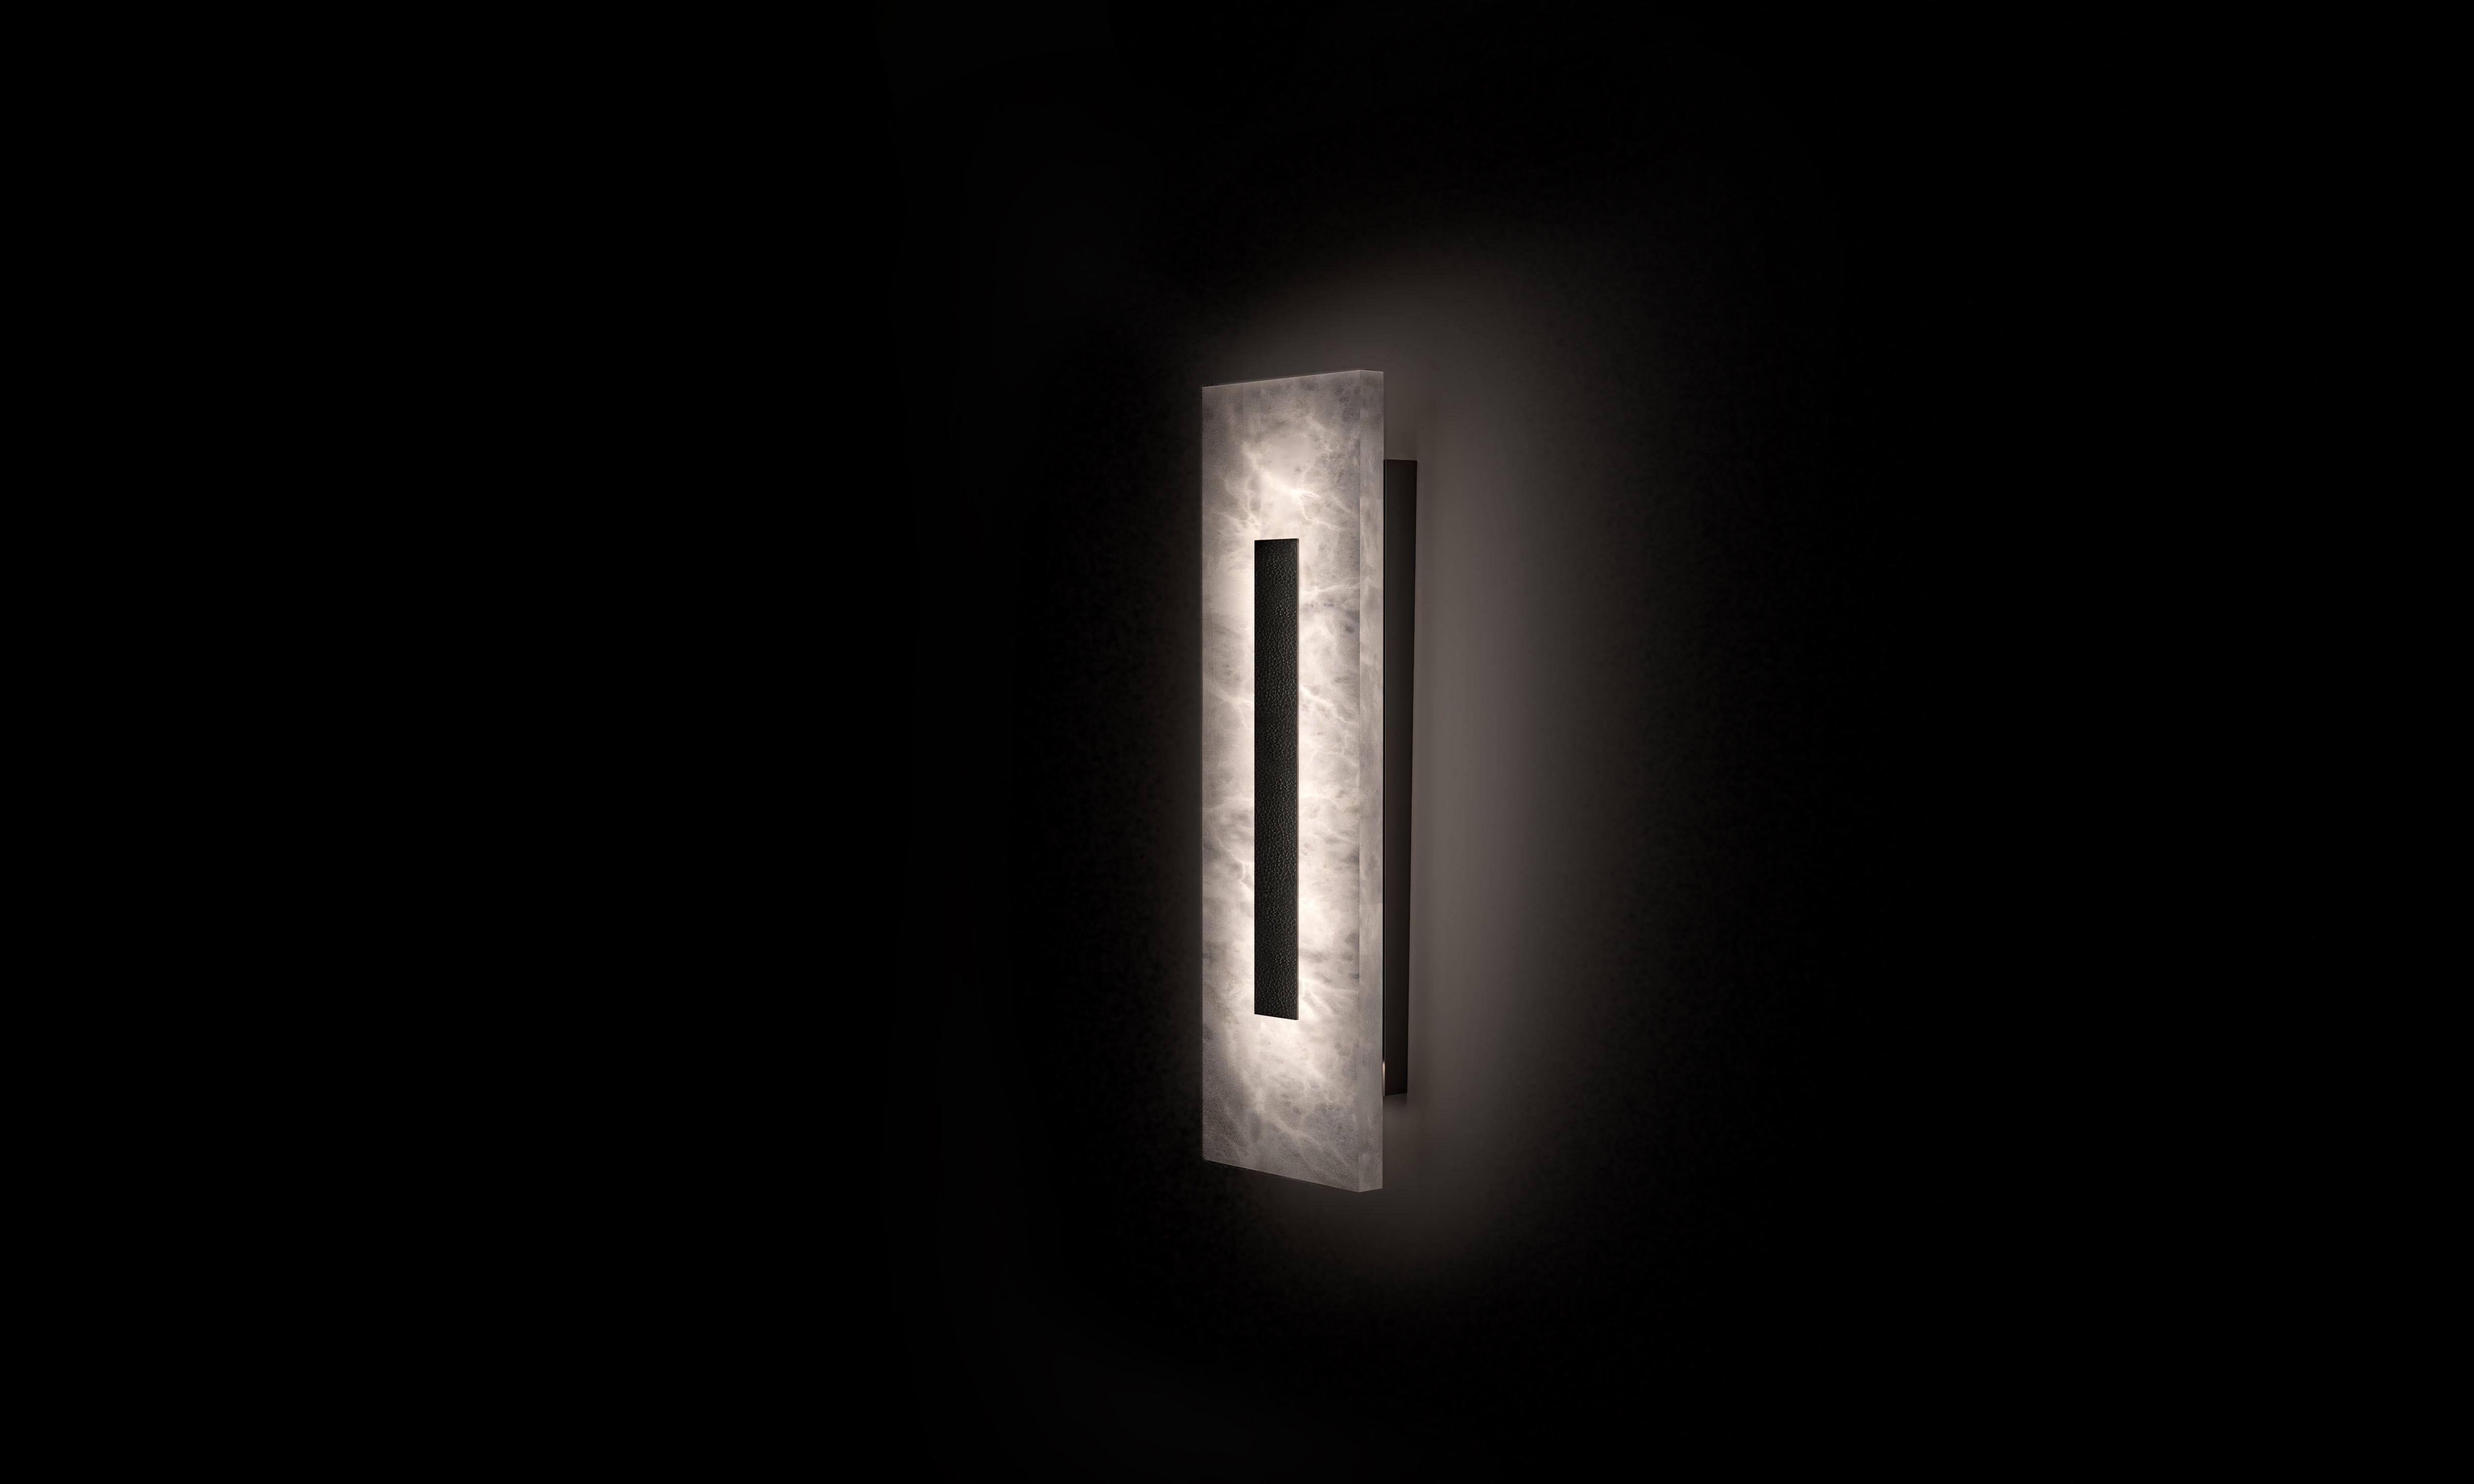 Small Himeji Wall Lamp by Alabastro Italiano
Dimensions: D 9 x W 15 x H 50 cm.
Materials: White alabaster, brushed black metal.
Available in other finishes and sizes.

2 x Strip LED
21.6 W/m

All our lamps can be wired according to each country. If